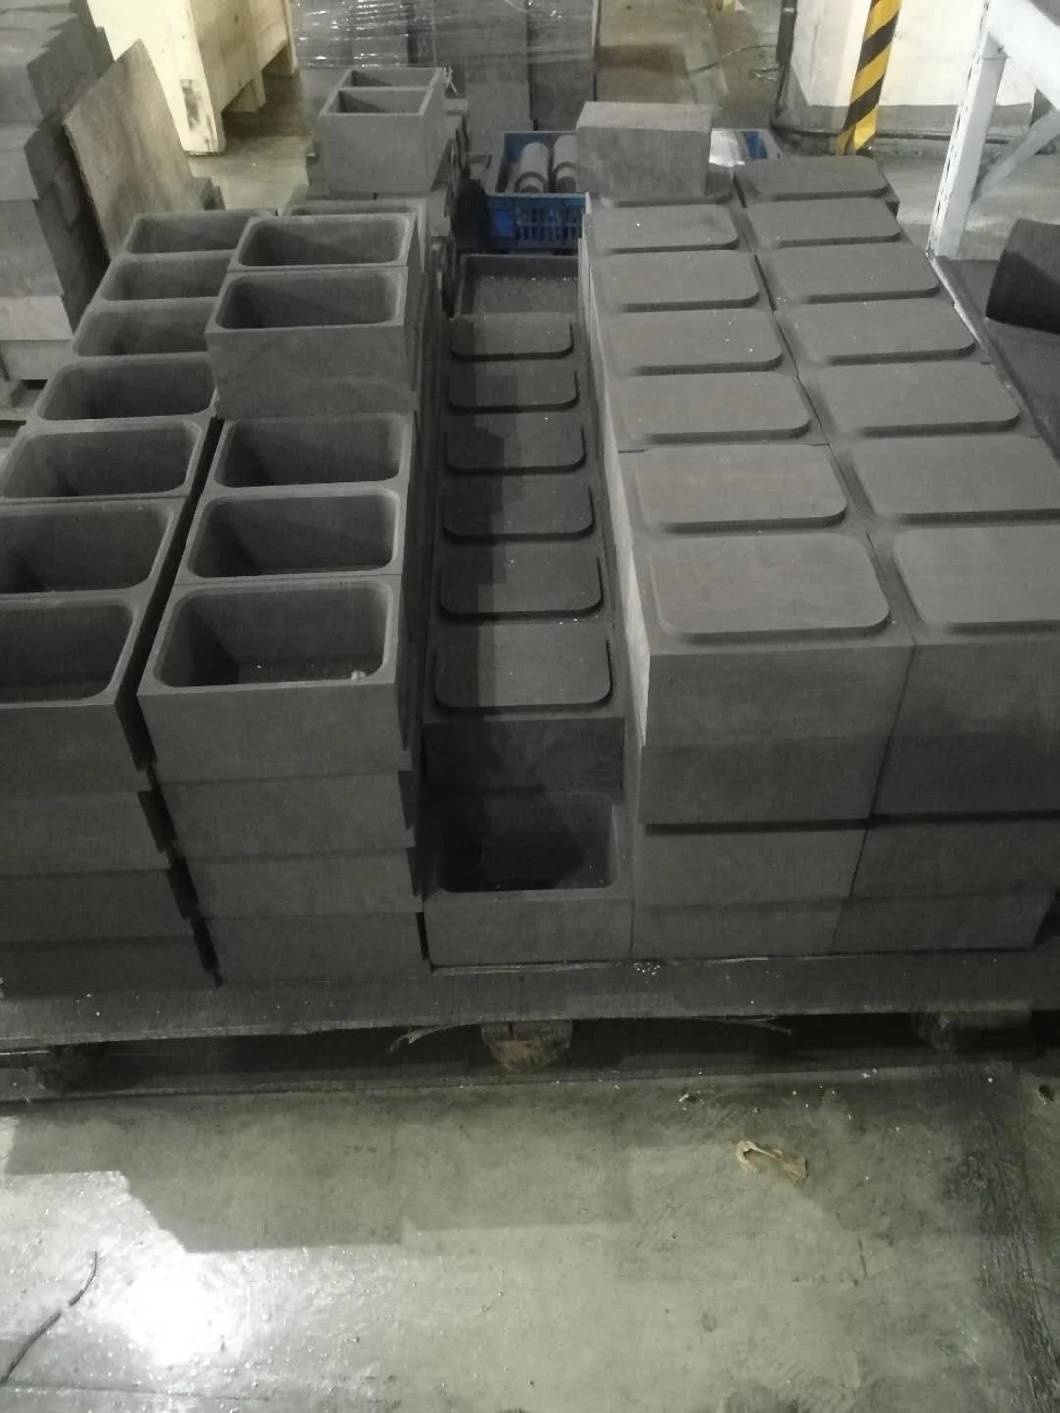 High Quality Carbon Graphite Box Graphite Container for Braze Welding Casting